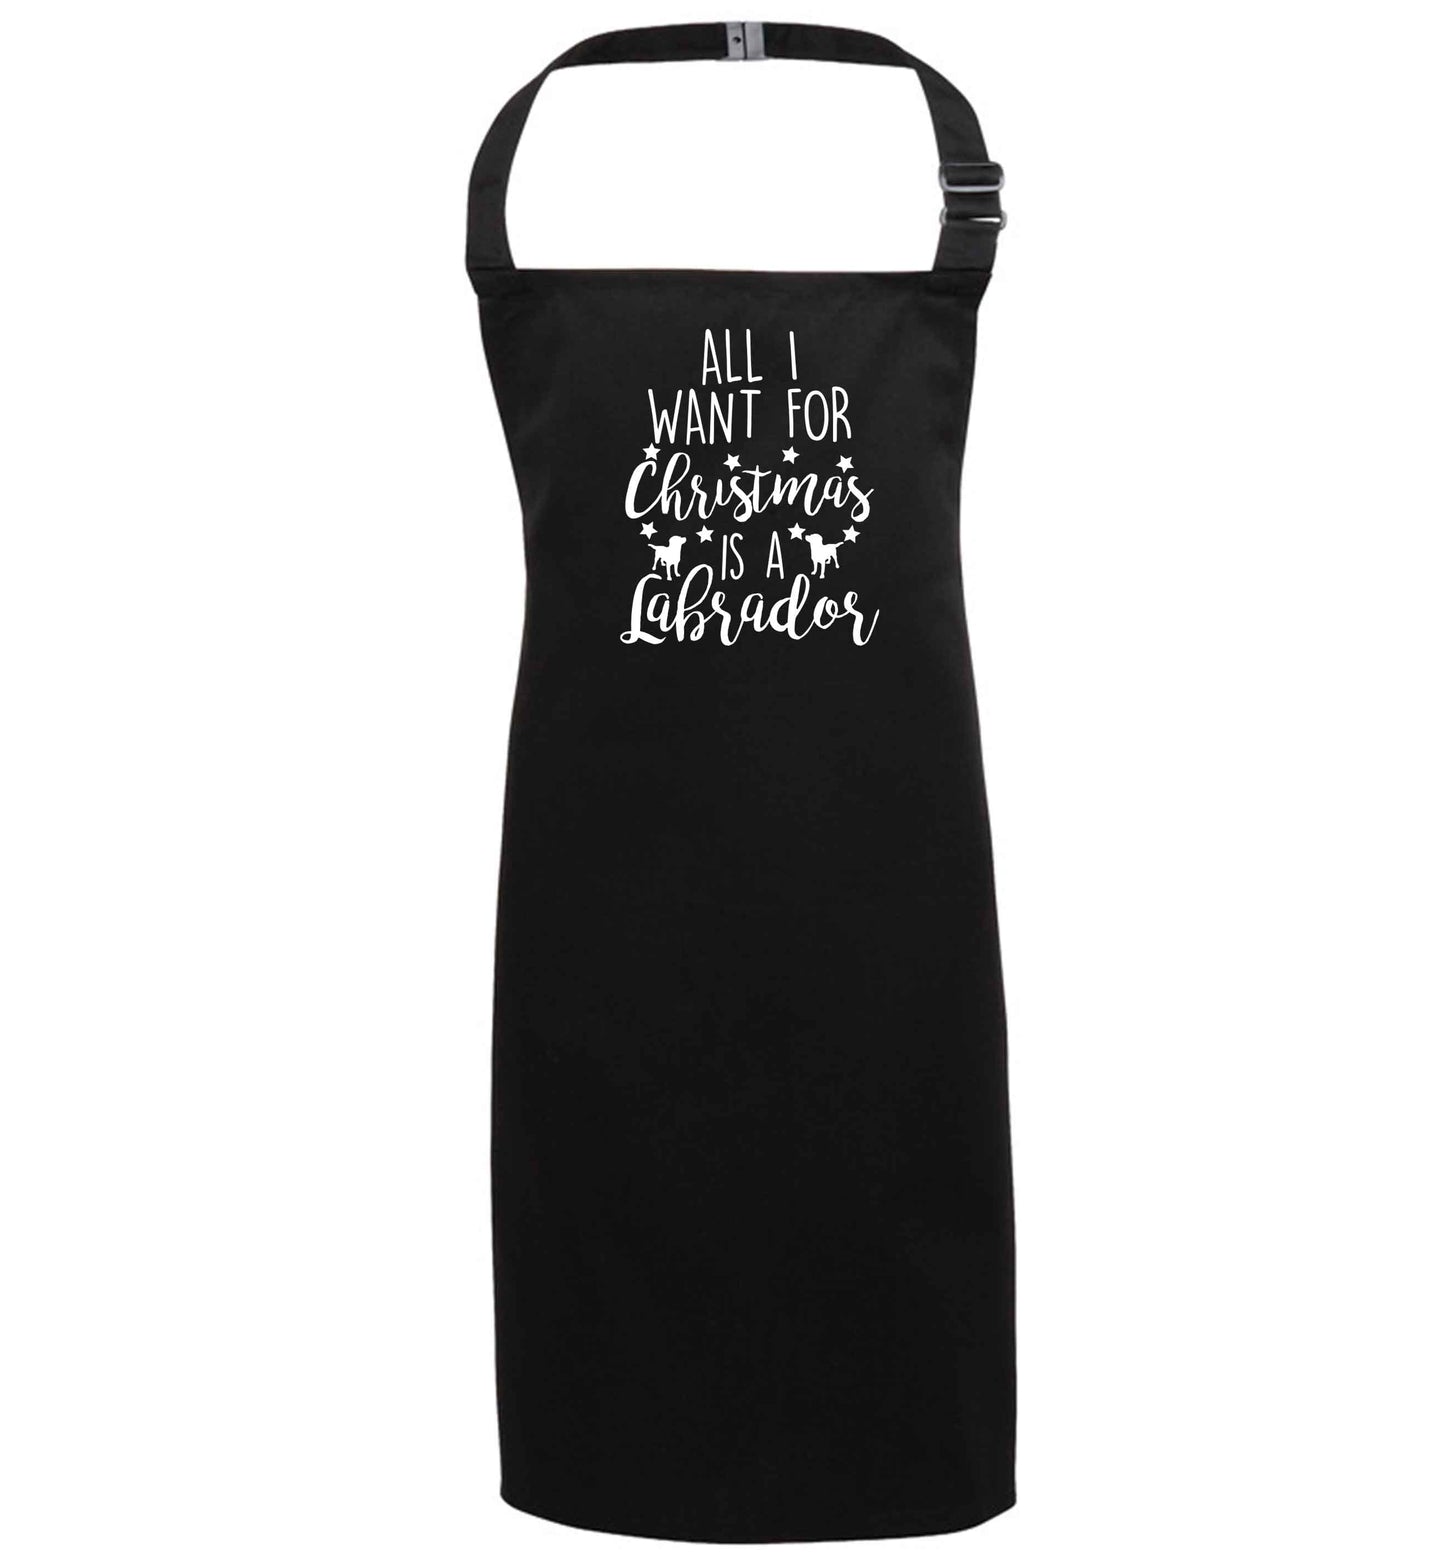 All I want for Christmas is a labrador black apron 7-10 years